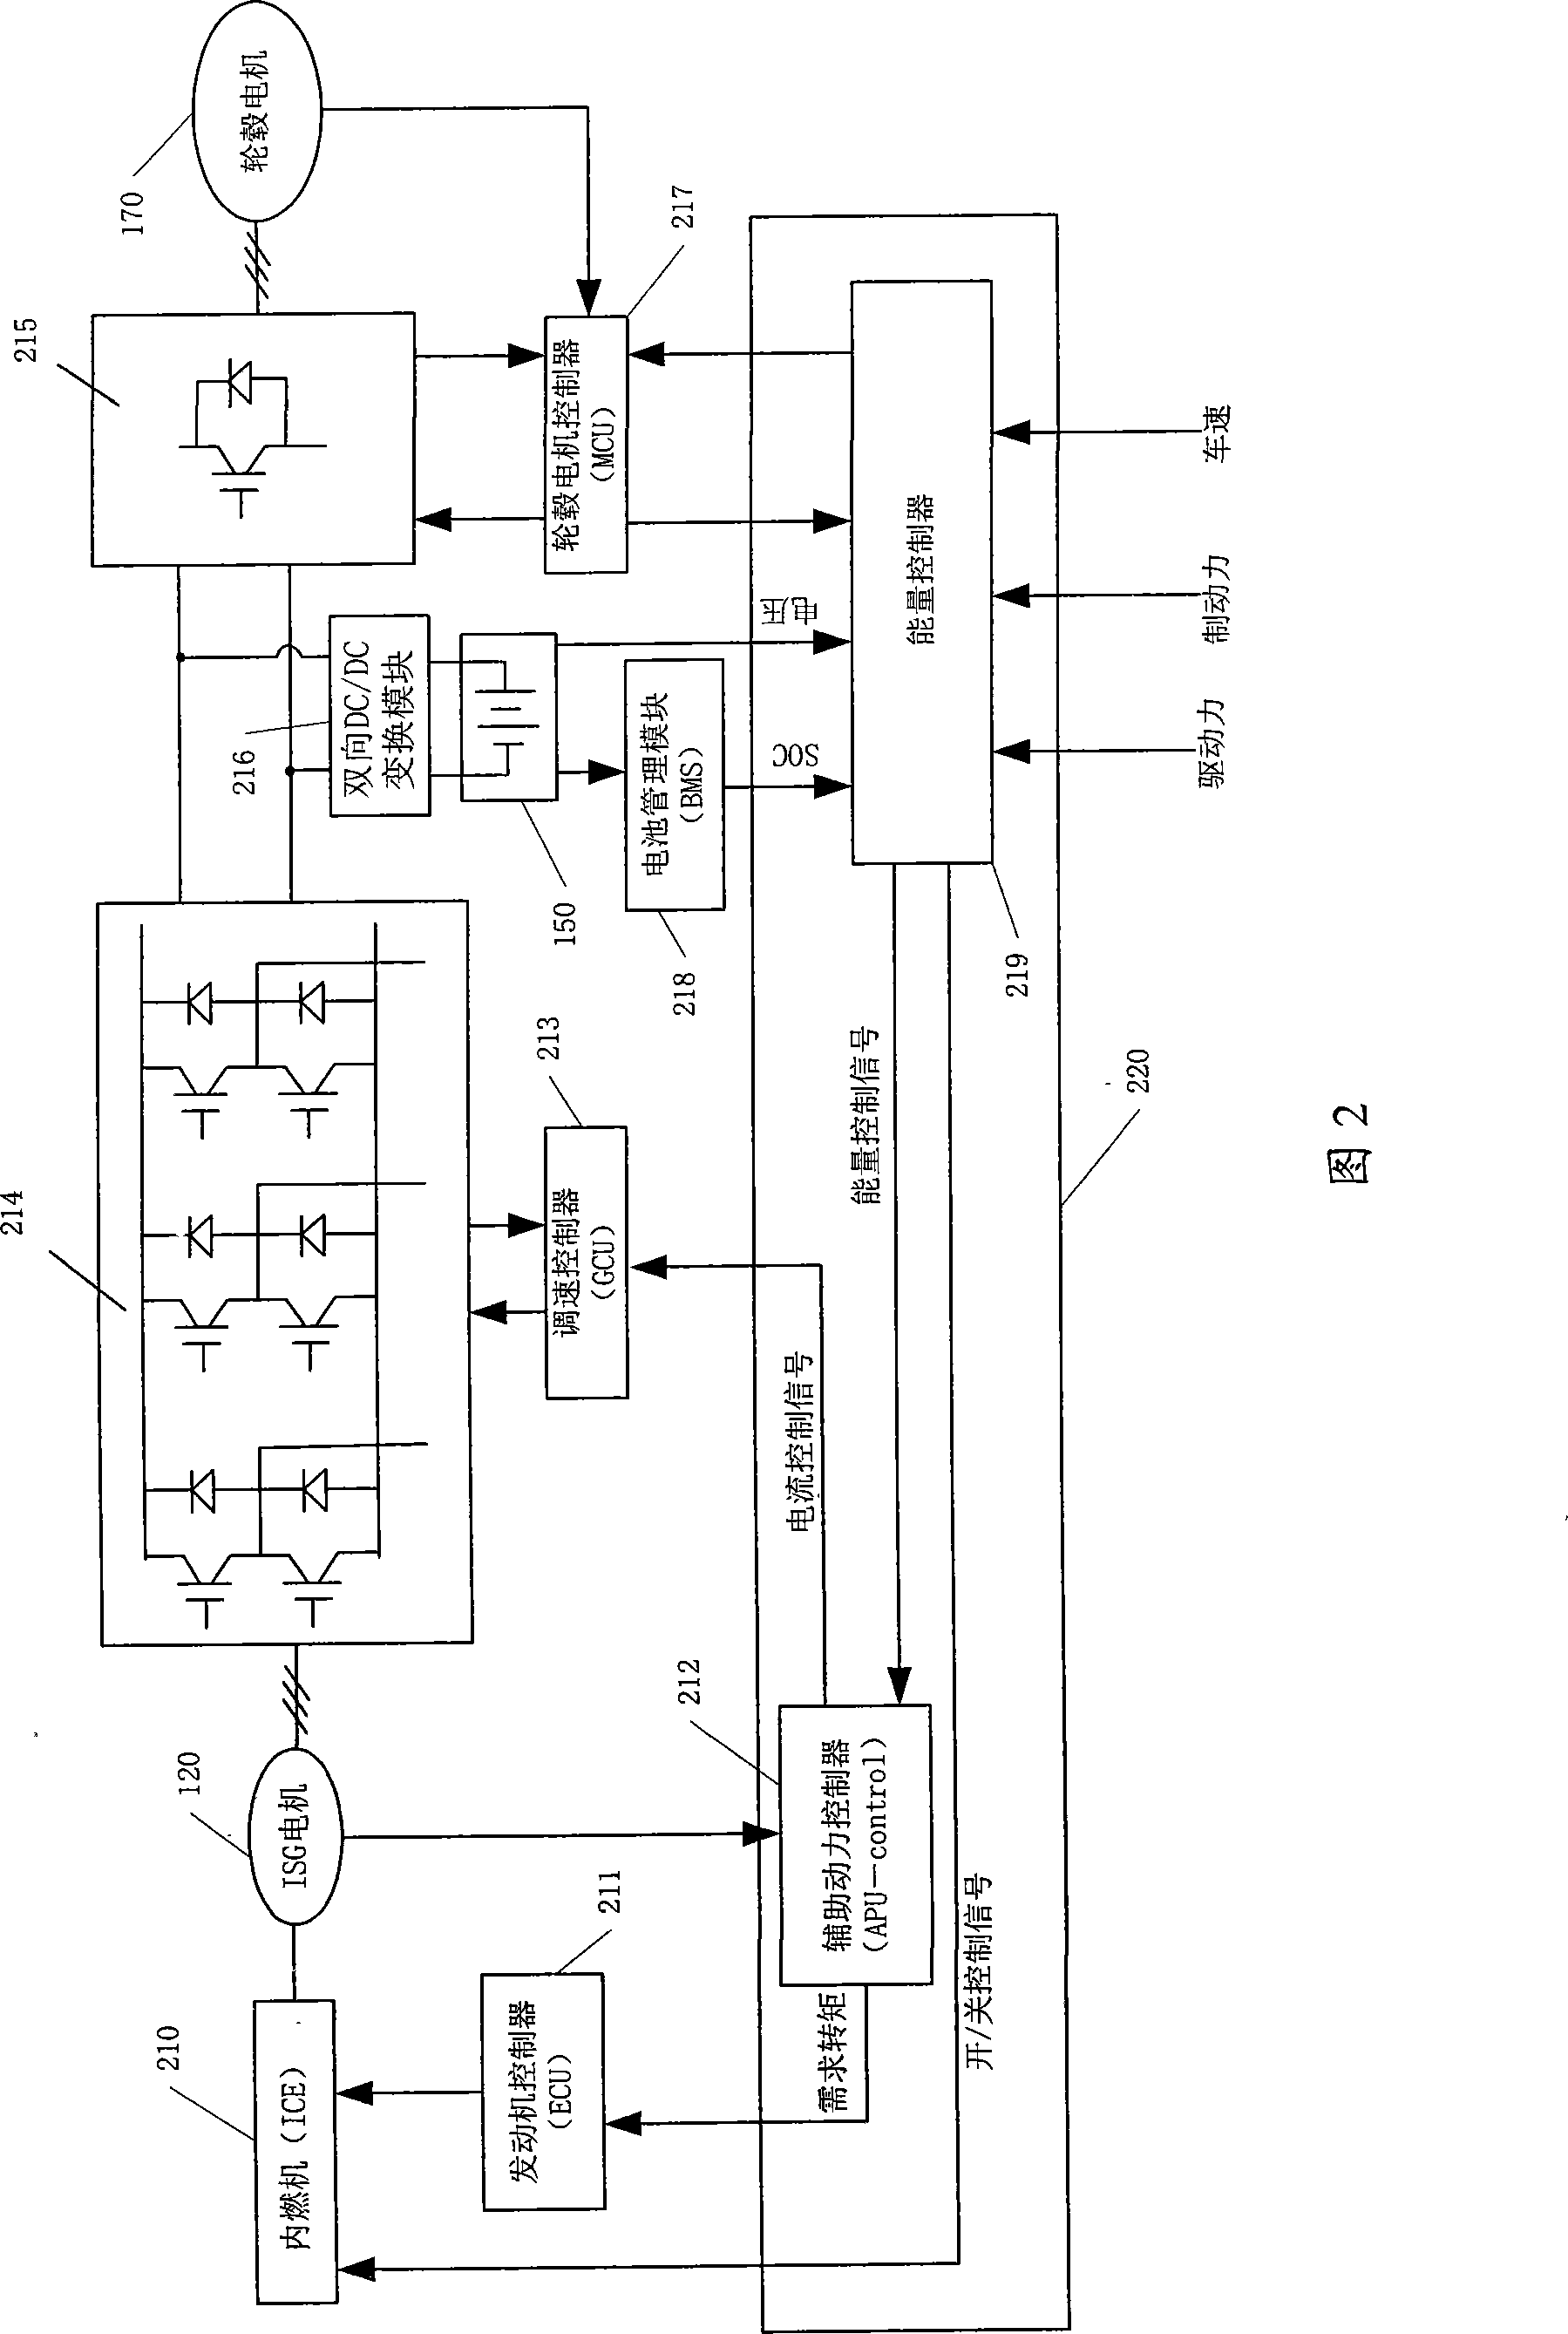 Mixed power system using electrical system to implement series-parallel power distribution